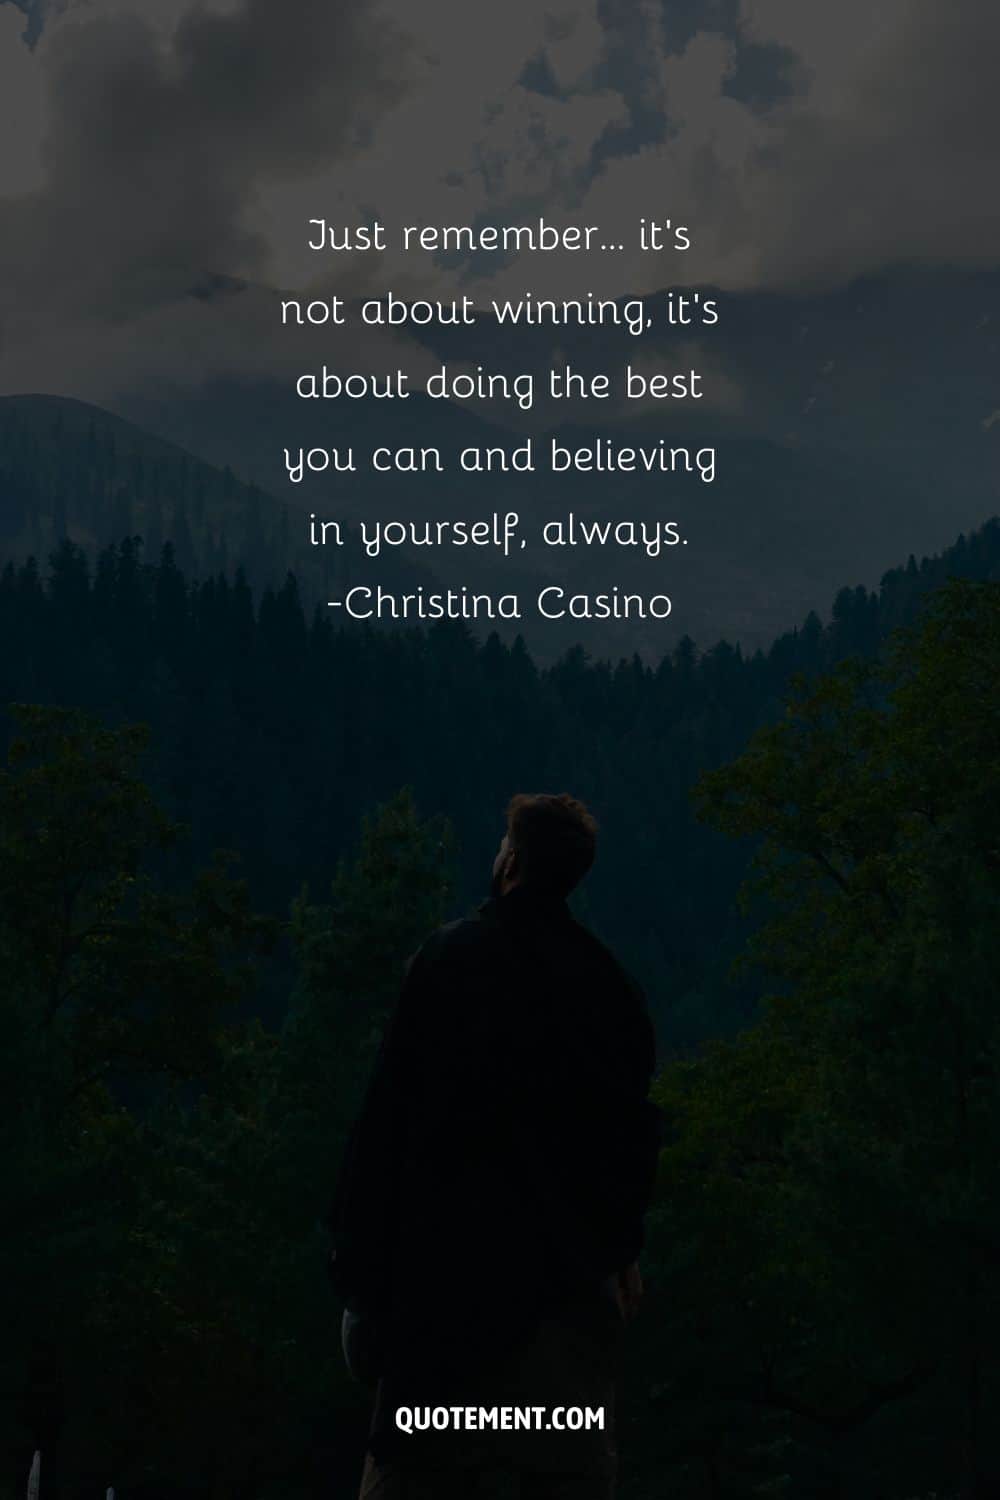 Just remember… it's not about winning, it's about doing the best you can and believing in yourself, always